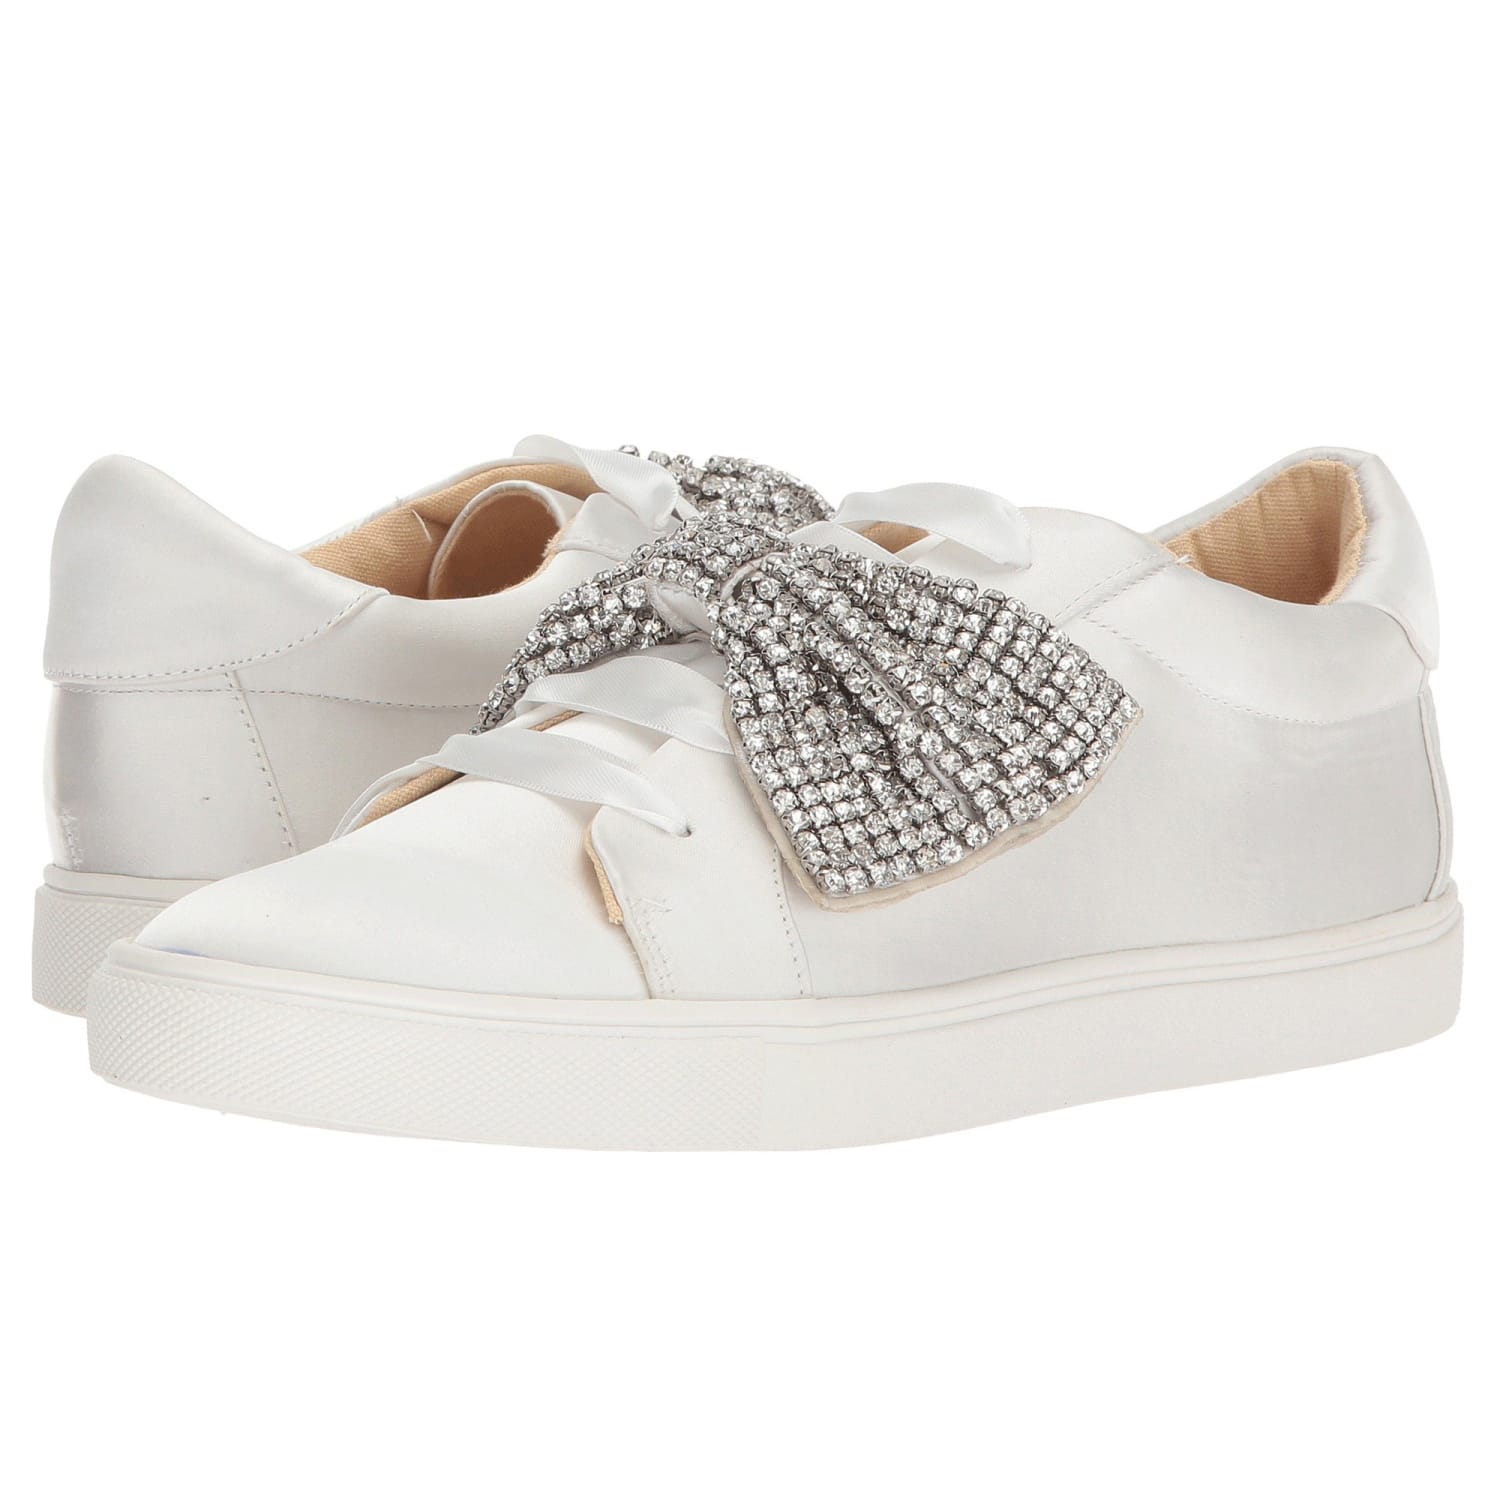 Keds Bow Sneakers | vlr.eng.br